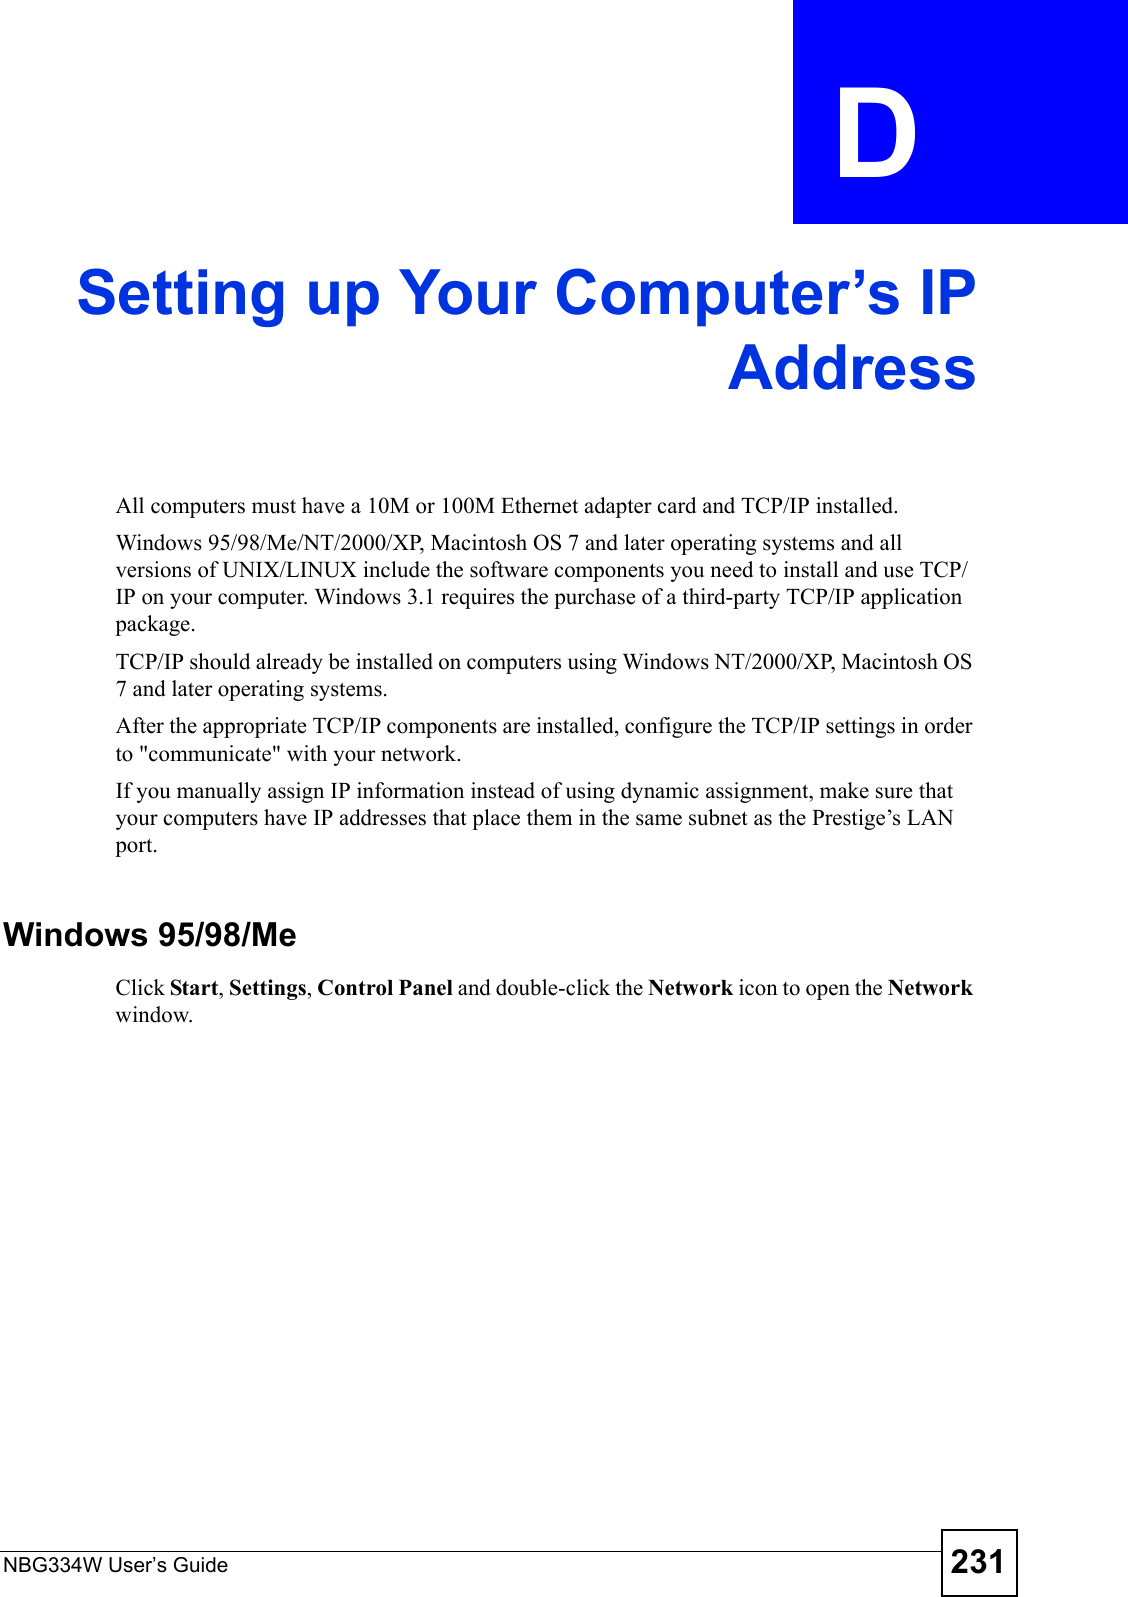 NBG334W User’s Guide 231APPENDIX  D Setting up Your Computer’s IPAddressAll computers must have a 10M or 100M Ethernet adapter card and TCP/IP installed. Windows 95/98/Me/NT/2000/XP, Macintosh OS 7 and later operating systems and all versions of UNIX/LINUX include the software components you need to install and use TCP/IP on your computer. Windows 3.1 requires the purchase of a third-party TCP/IP application package.TCP/IP should already be installed on computers using Windows NT/2000/XP, Macintosh OS 7 and later operating systems.After the appropriate TCP/IP components are installed, configure the TCP/IP settings in order to &quot;communicate&quot; with your network. If you manually assign IP information instead of using dynamic assignment, make sure that your computers have IP addresses that place them in the same subnet as the Prestige’s LAN port.Windows 95/98/MeClick Start, Settings, Control Panel and double-click the Network icon to open the Network window.